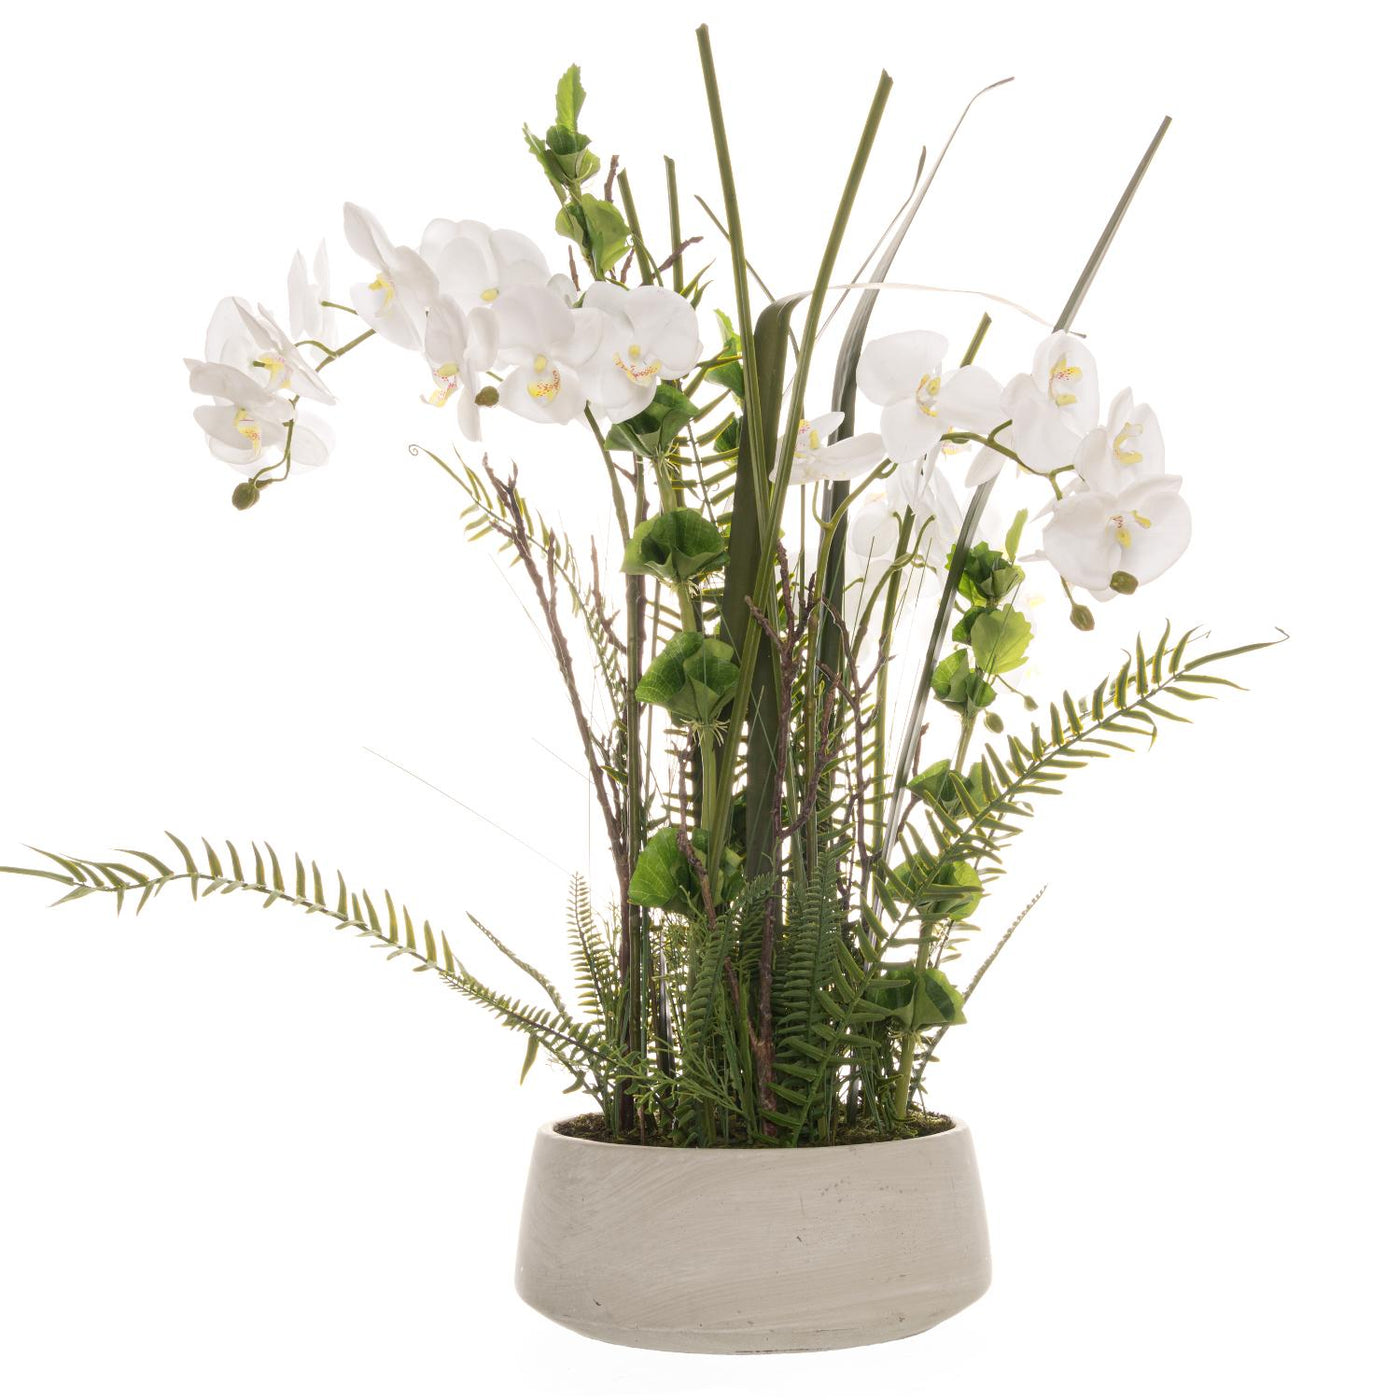 Hill Interiors Arge Potted Orchid In Stone Pot With Fern Detail